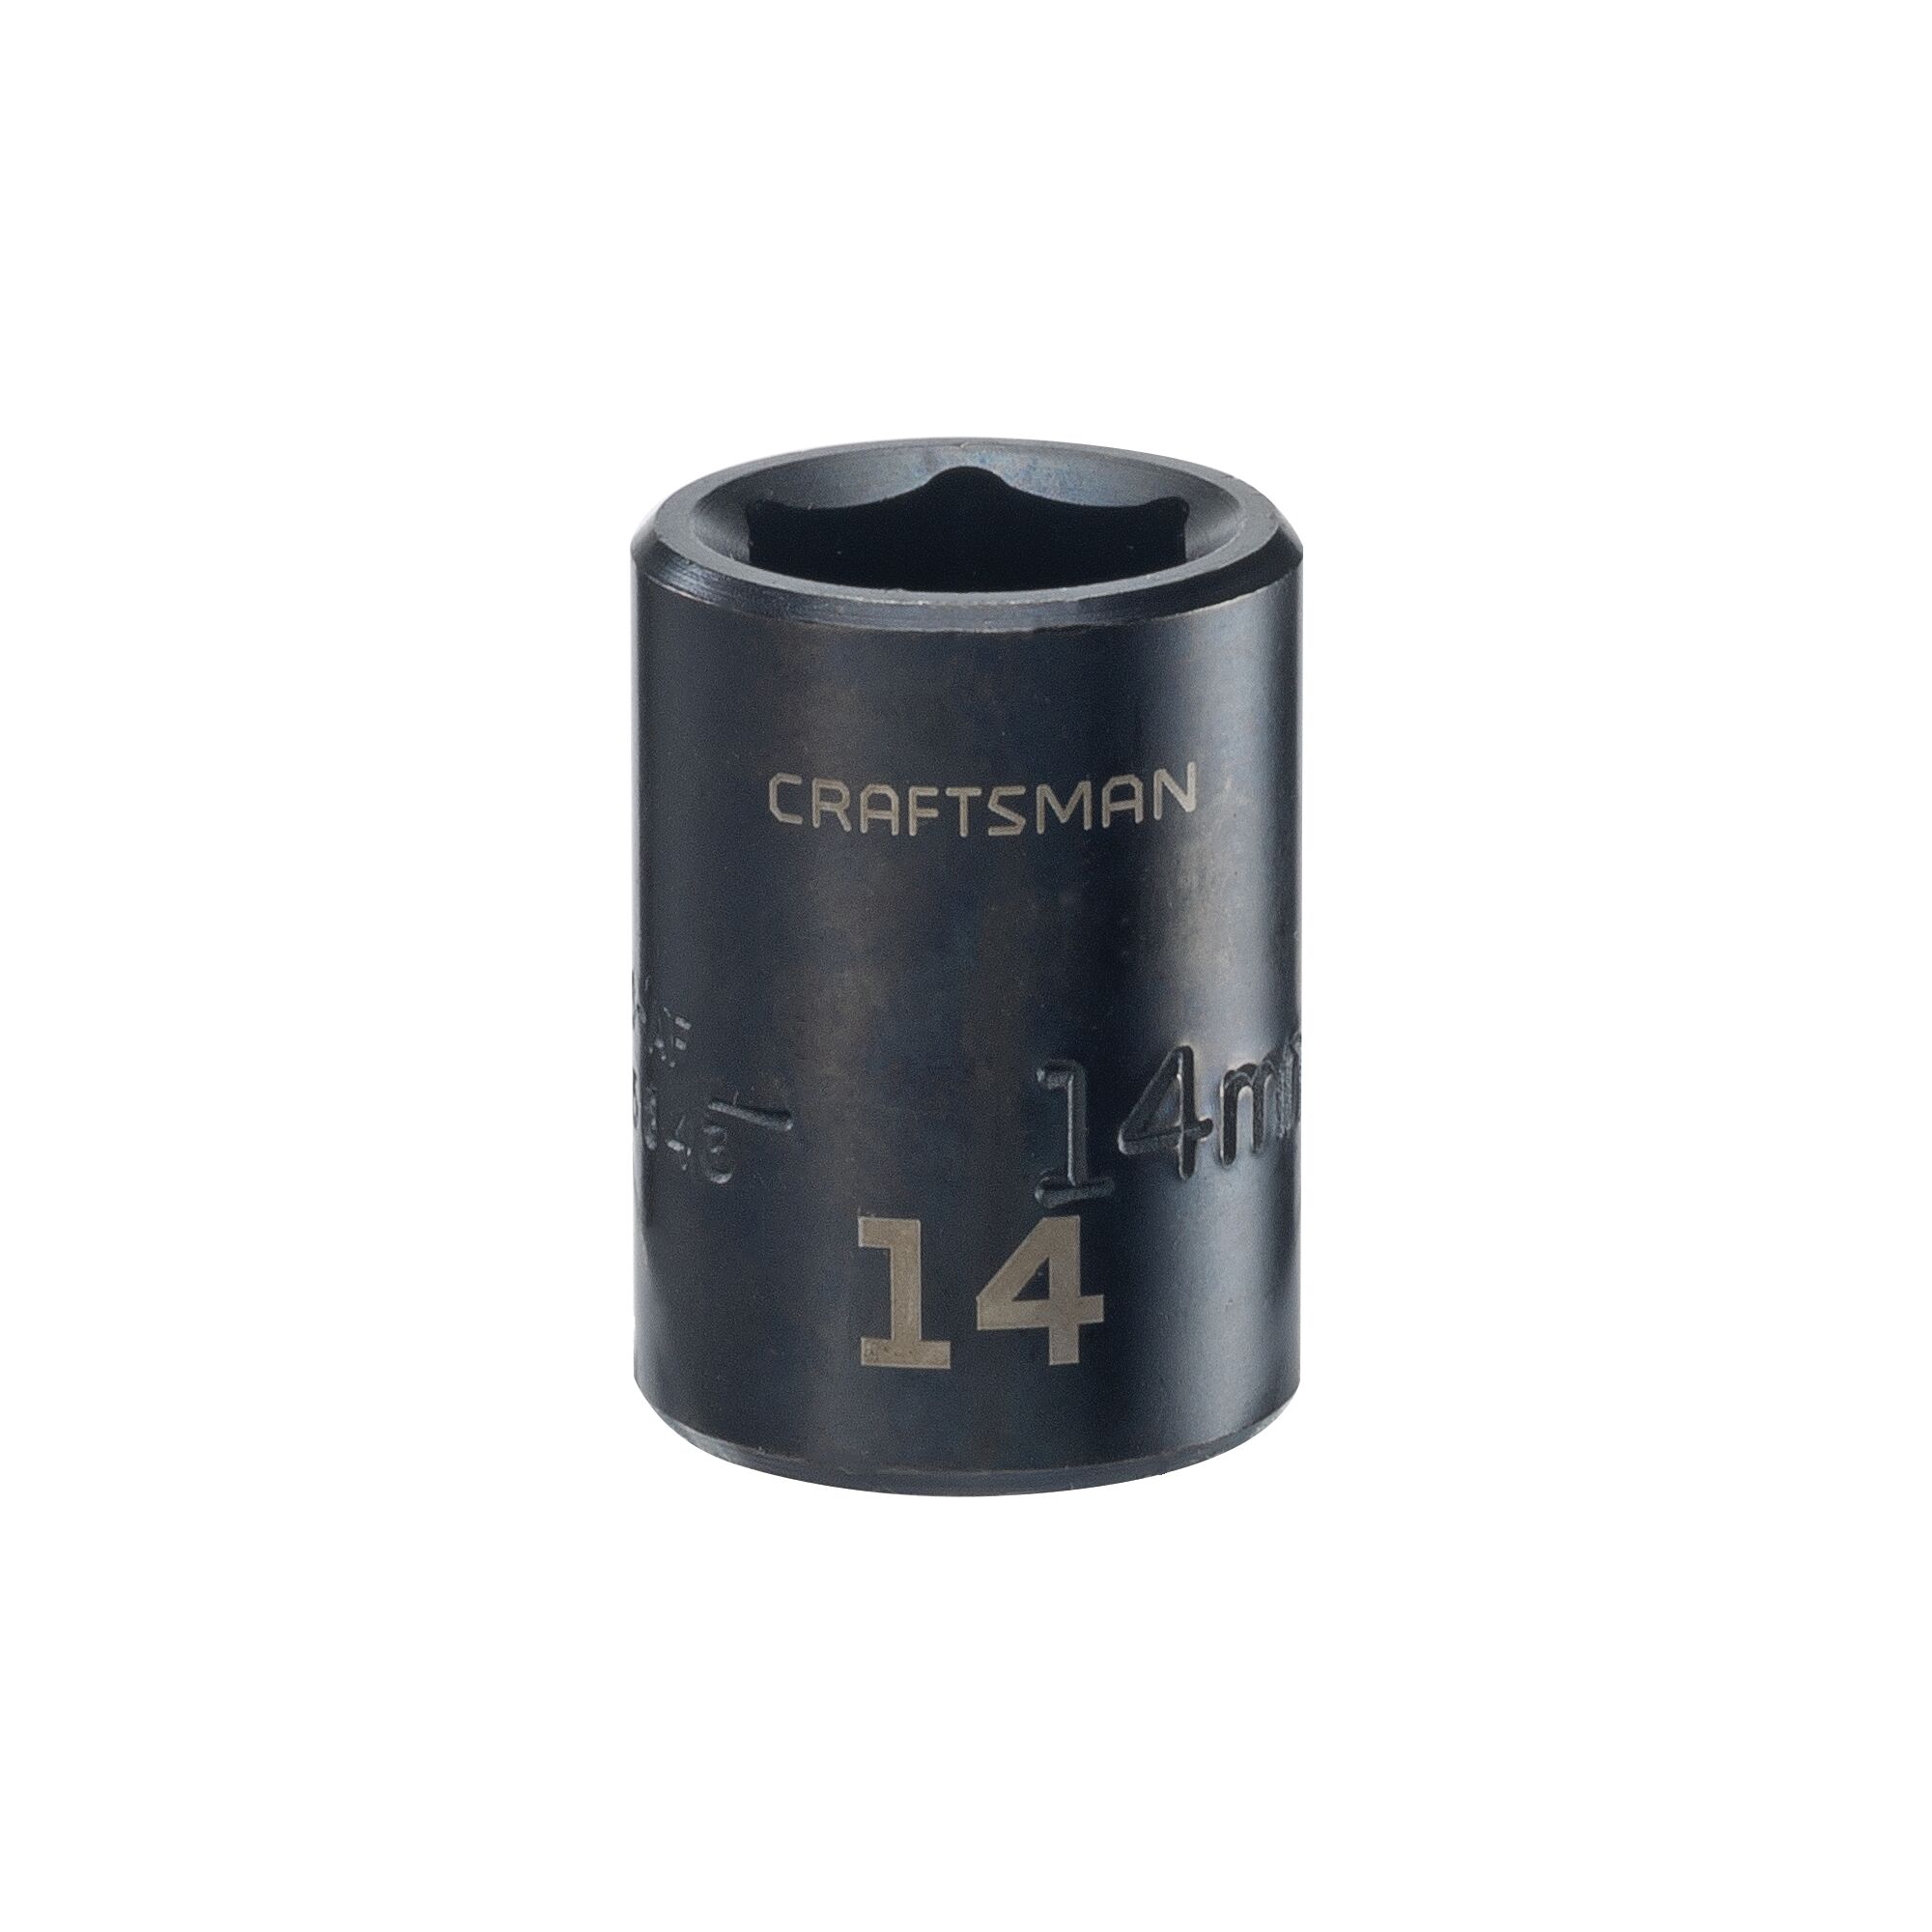 3 eighths inch 14 millimeter metric impact shallow socket.